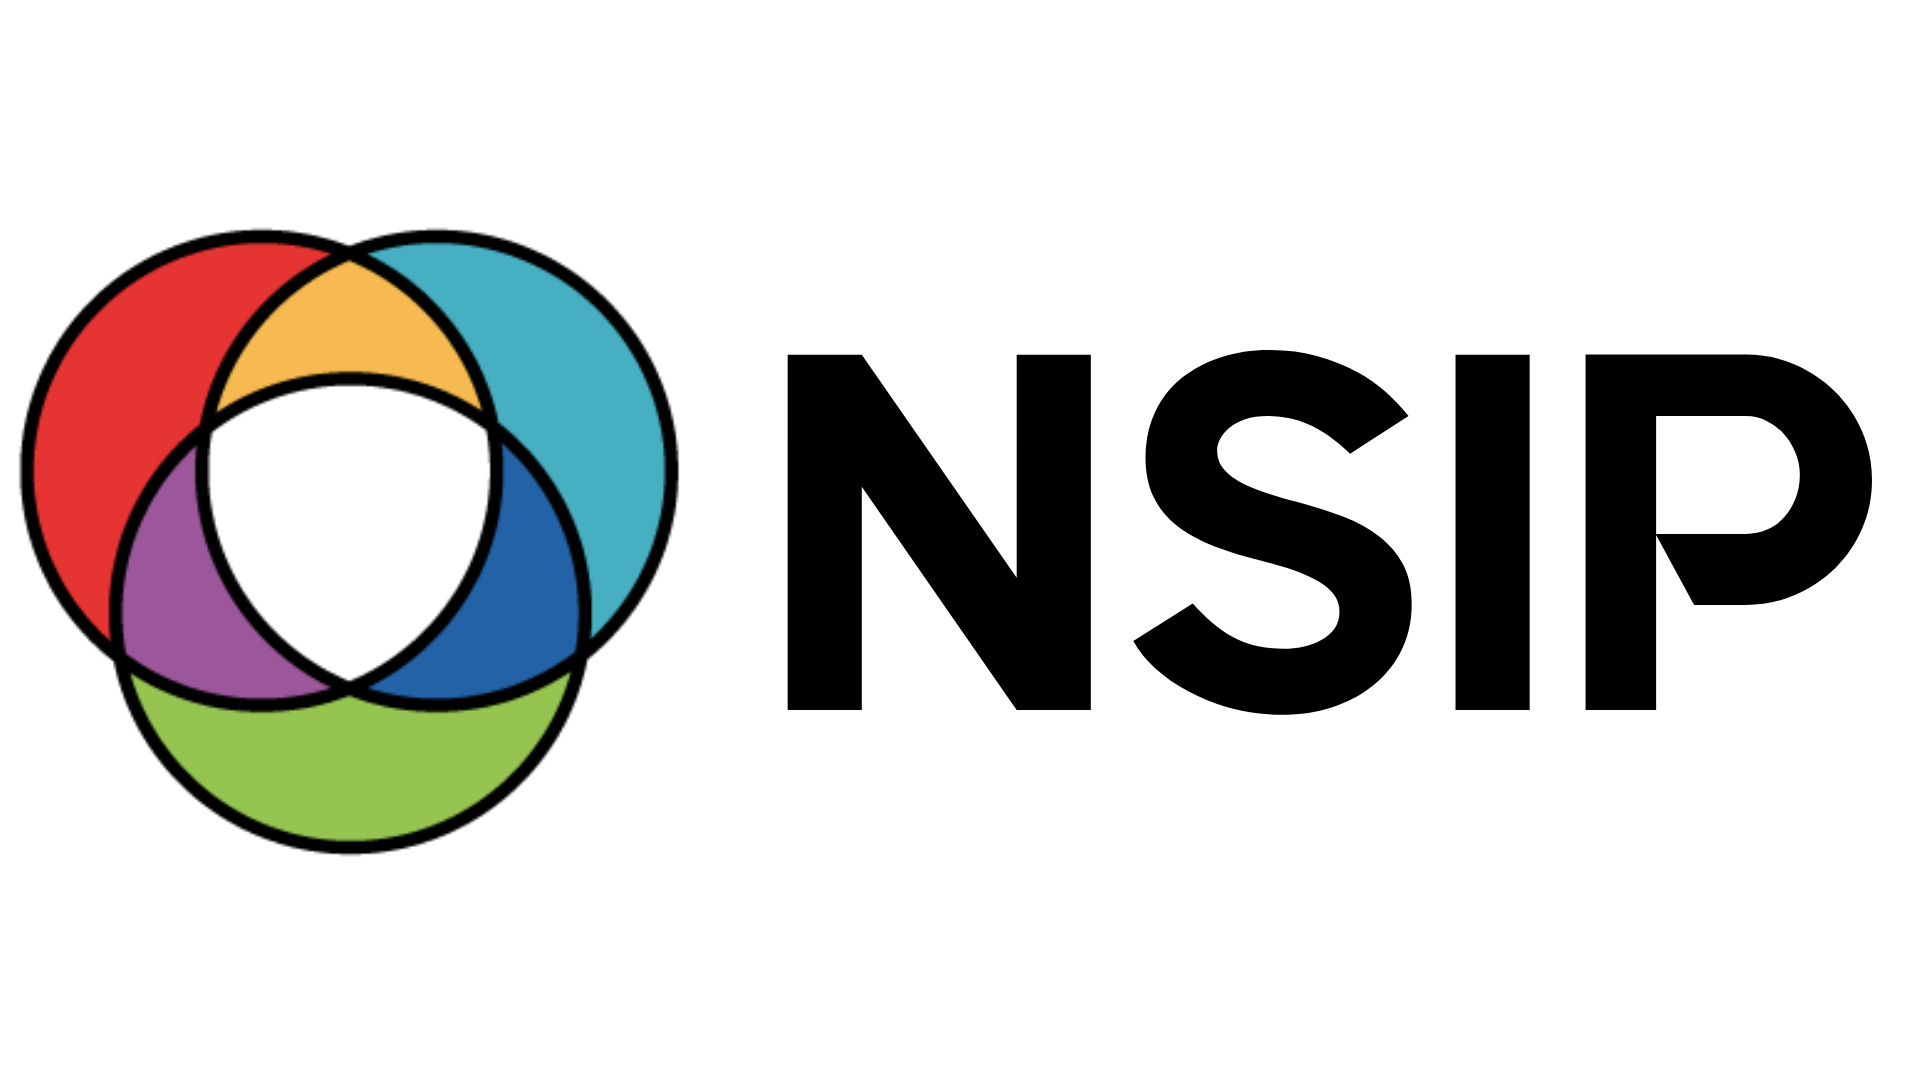 National Society of Intimacy Professionals logo